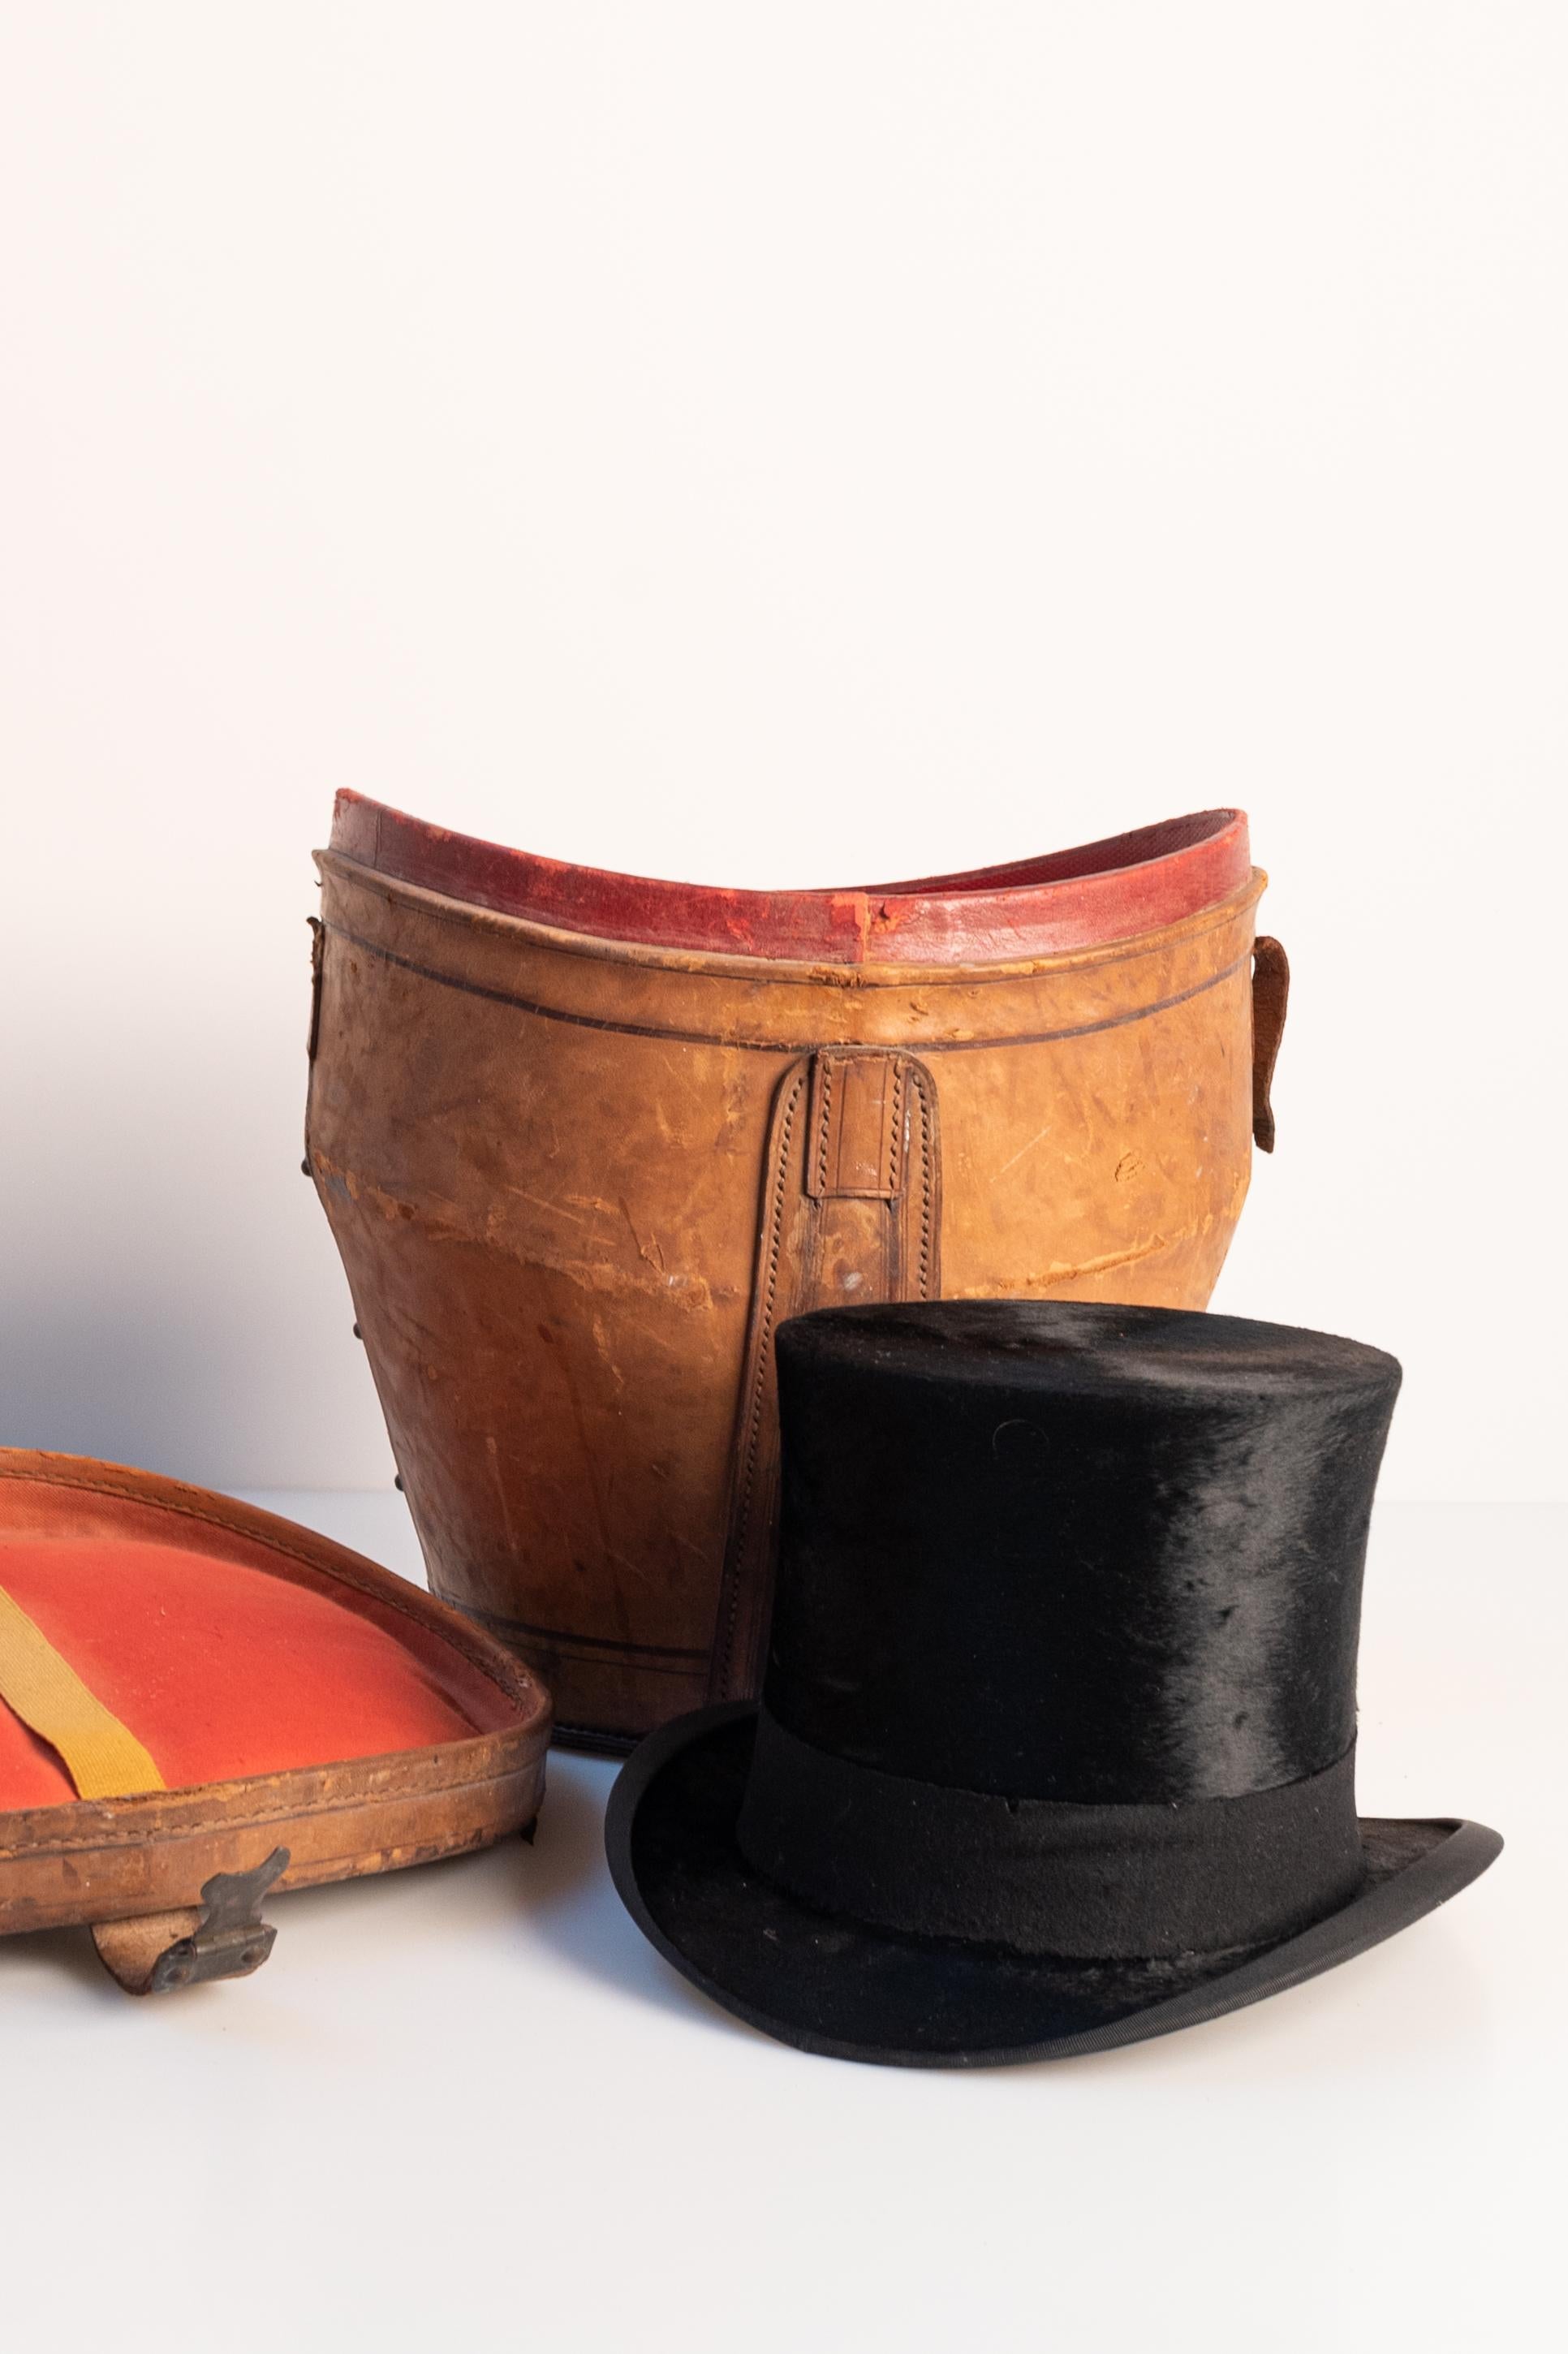 Moleskin top hat, with leather hatbox (late 19th - early 20th century). The hat was made by Berteil Paris (France),  an established house existing since 1840. 

Dimensions: 
The hat including the brim: 25 cm W x 29 cm D
The hat without the brim: 16